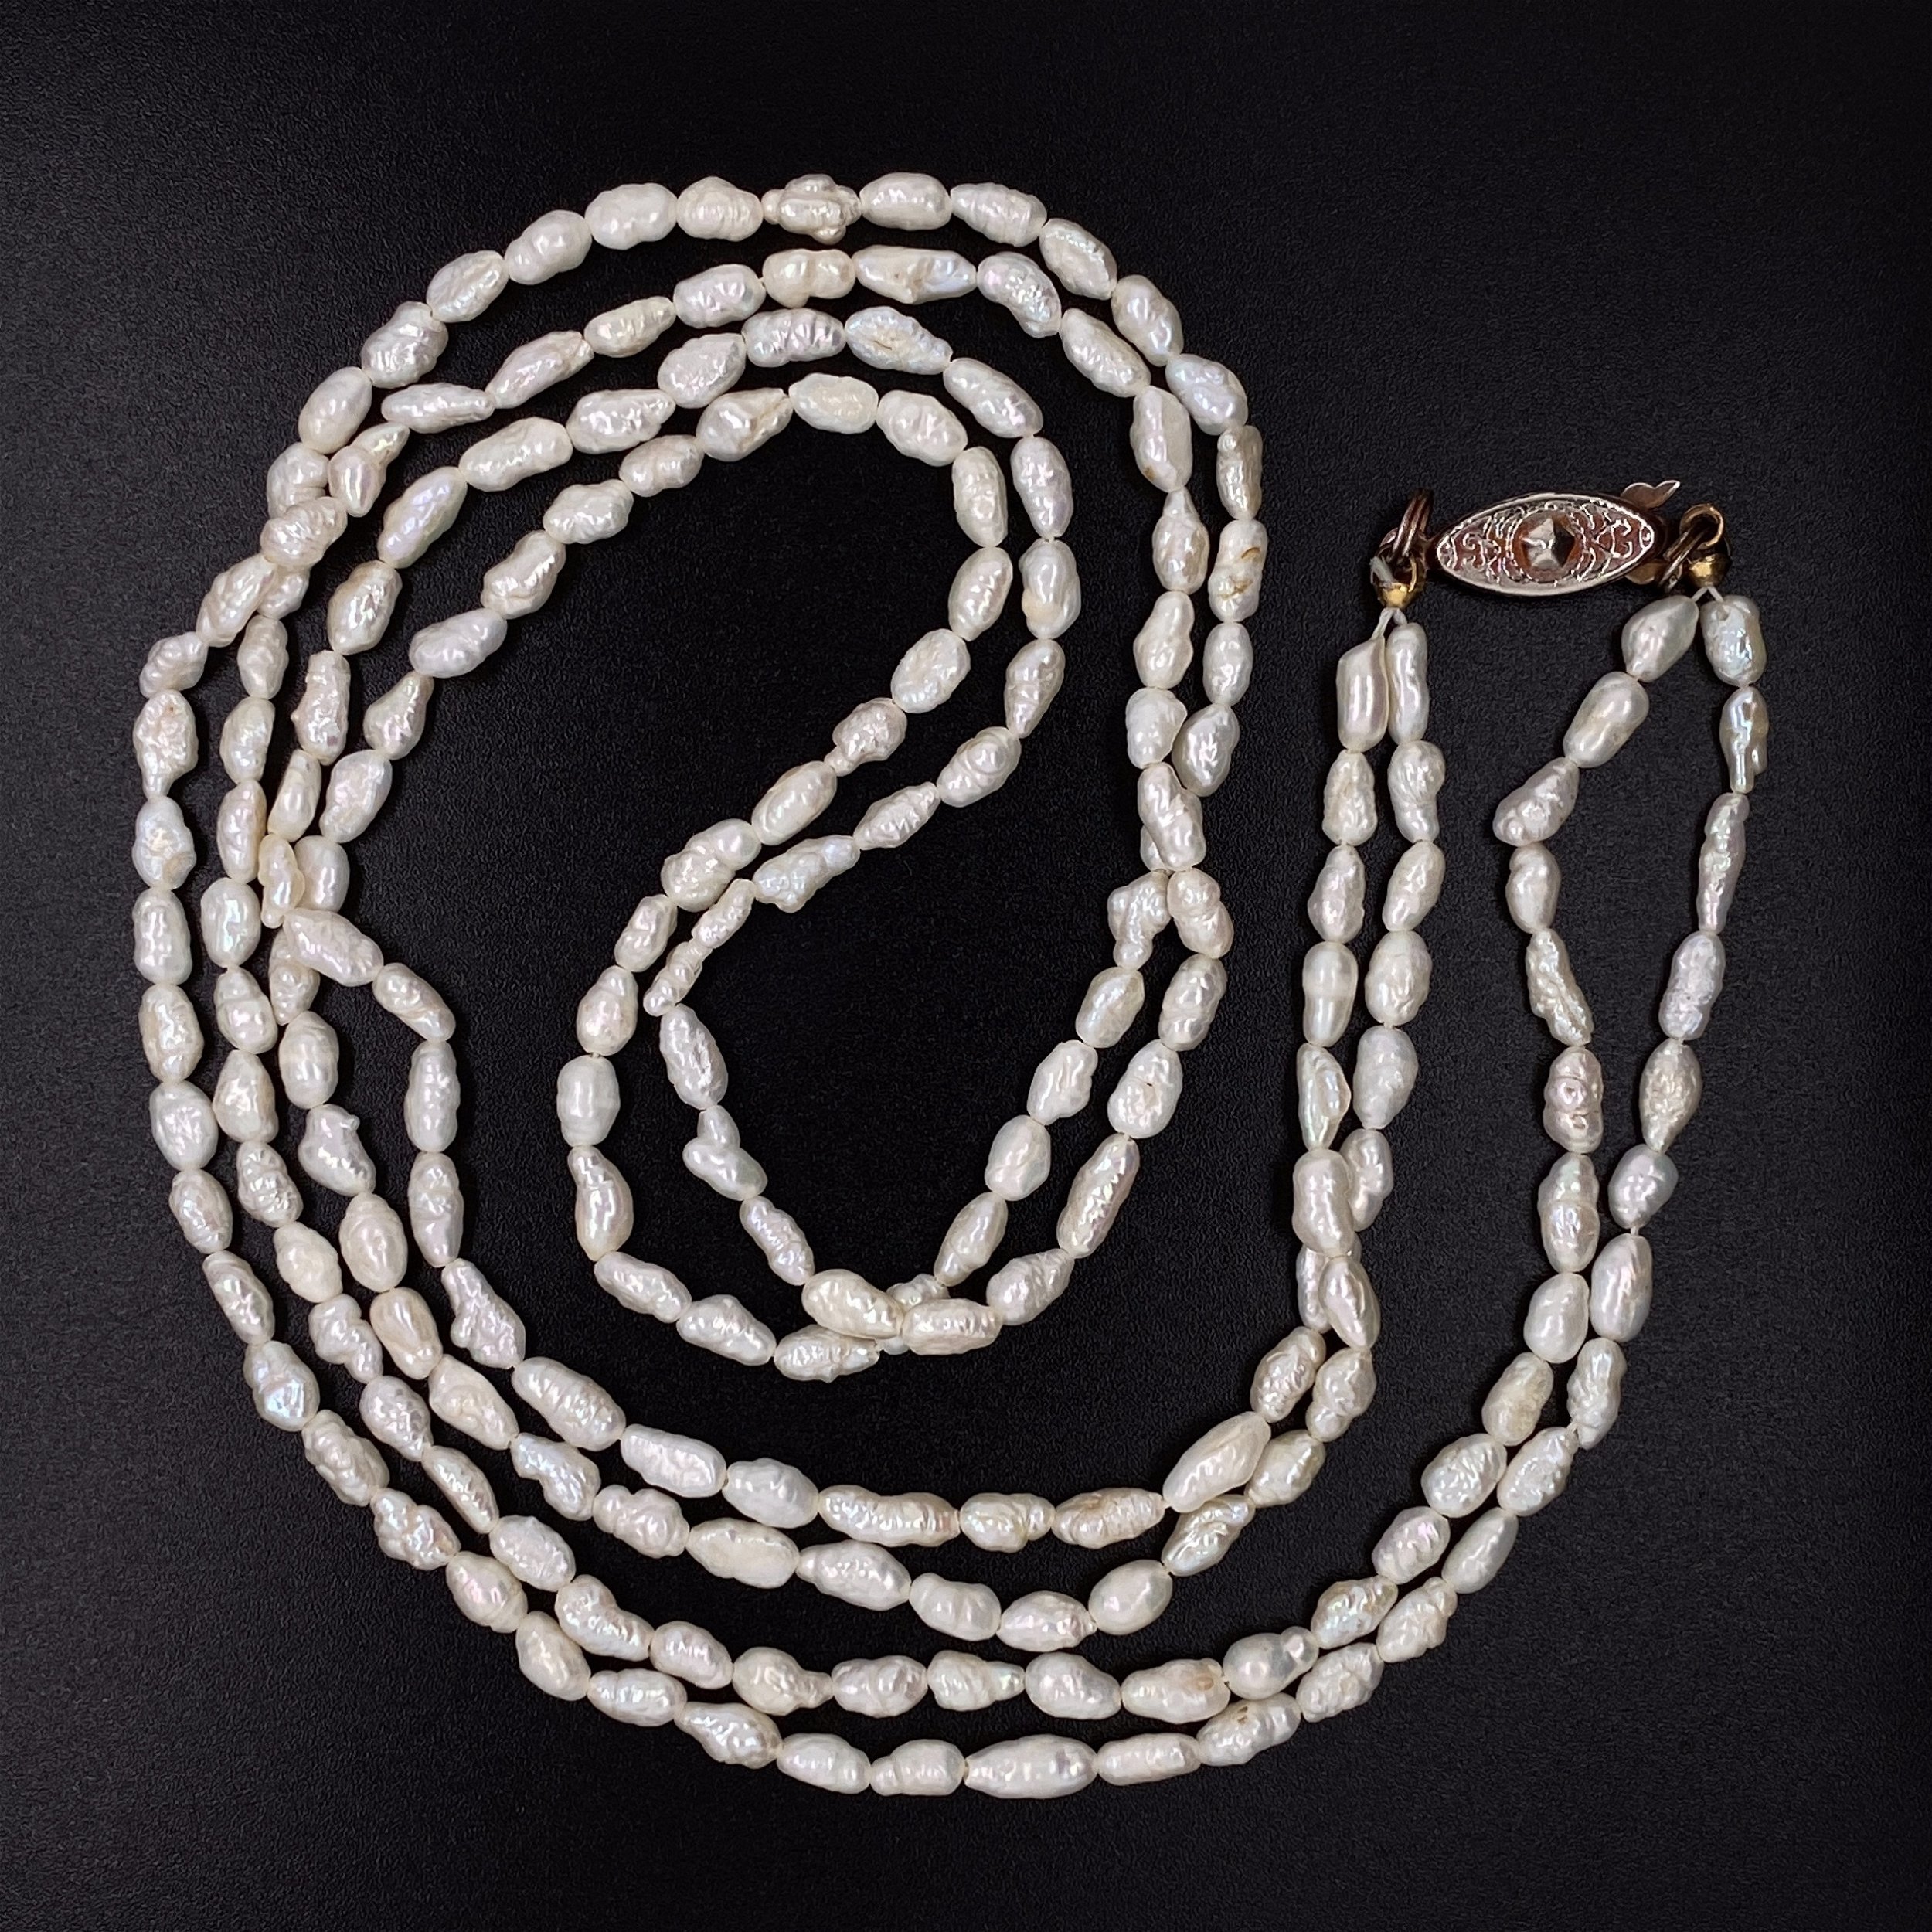 Double Strand Freshwater Pearl Necklace, Base Metal Clasp, 24"